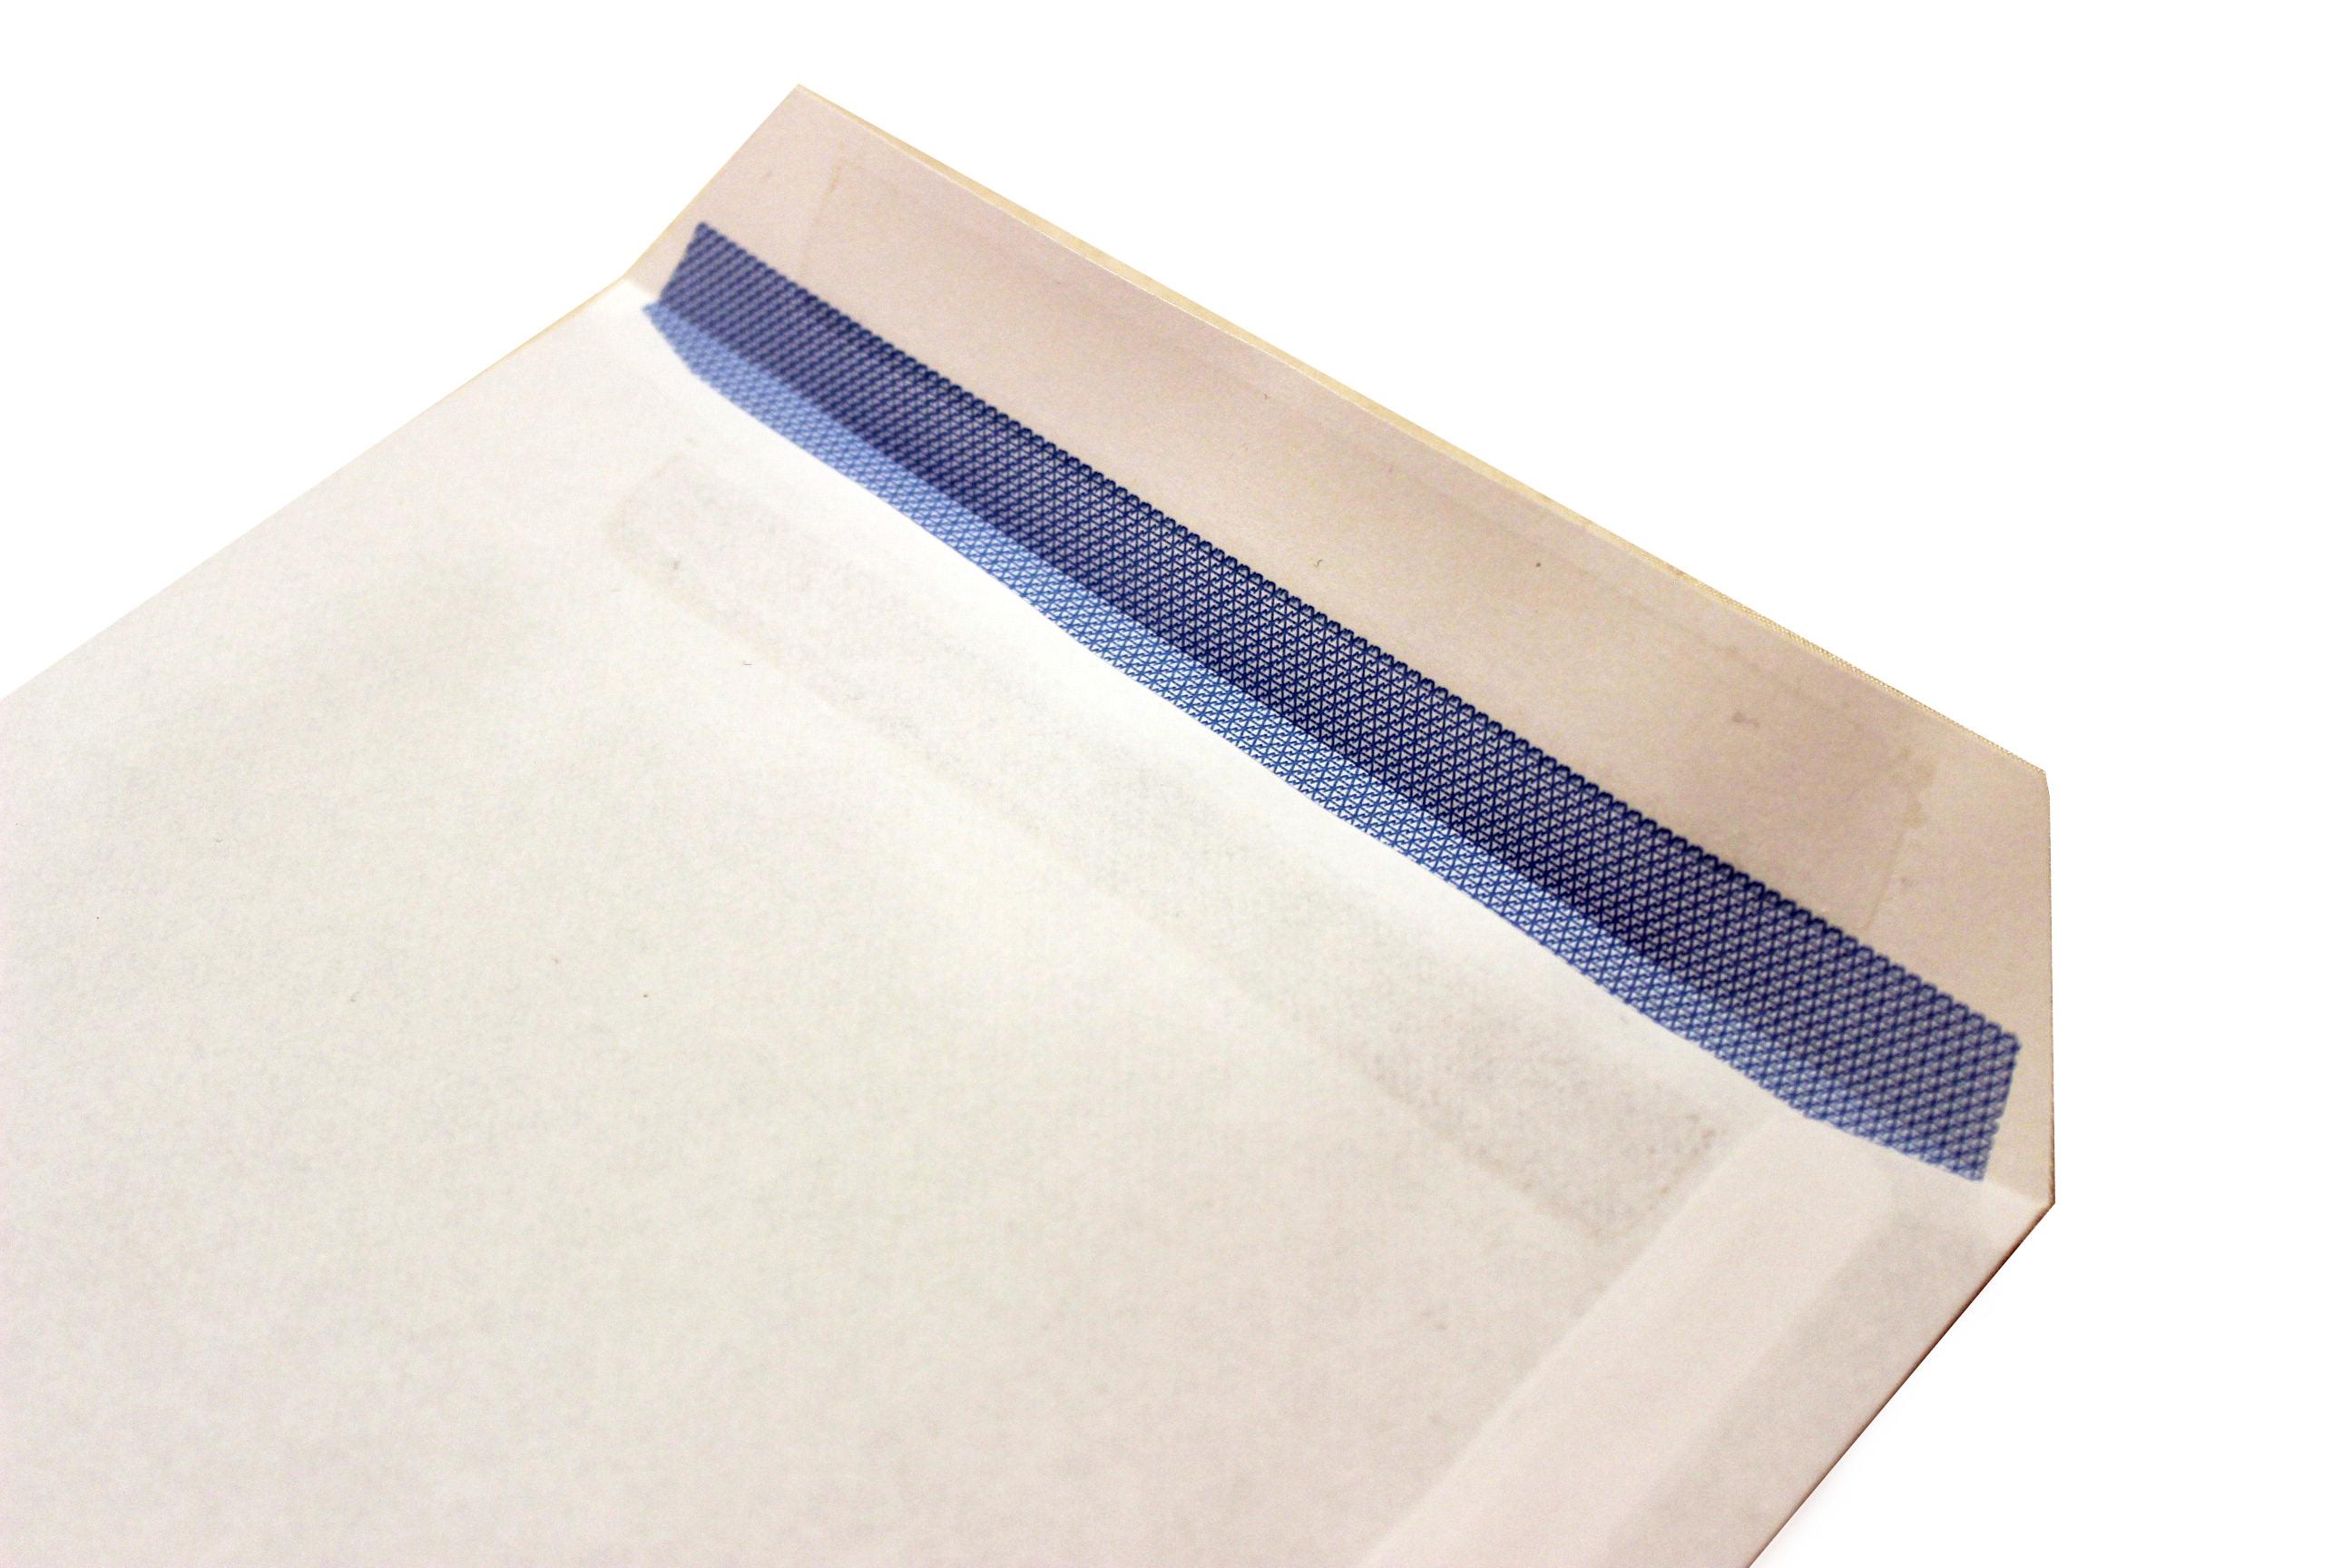 C4 Envelope with flap open